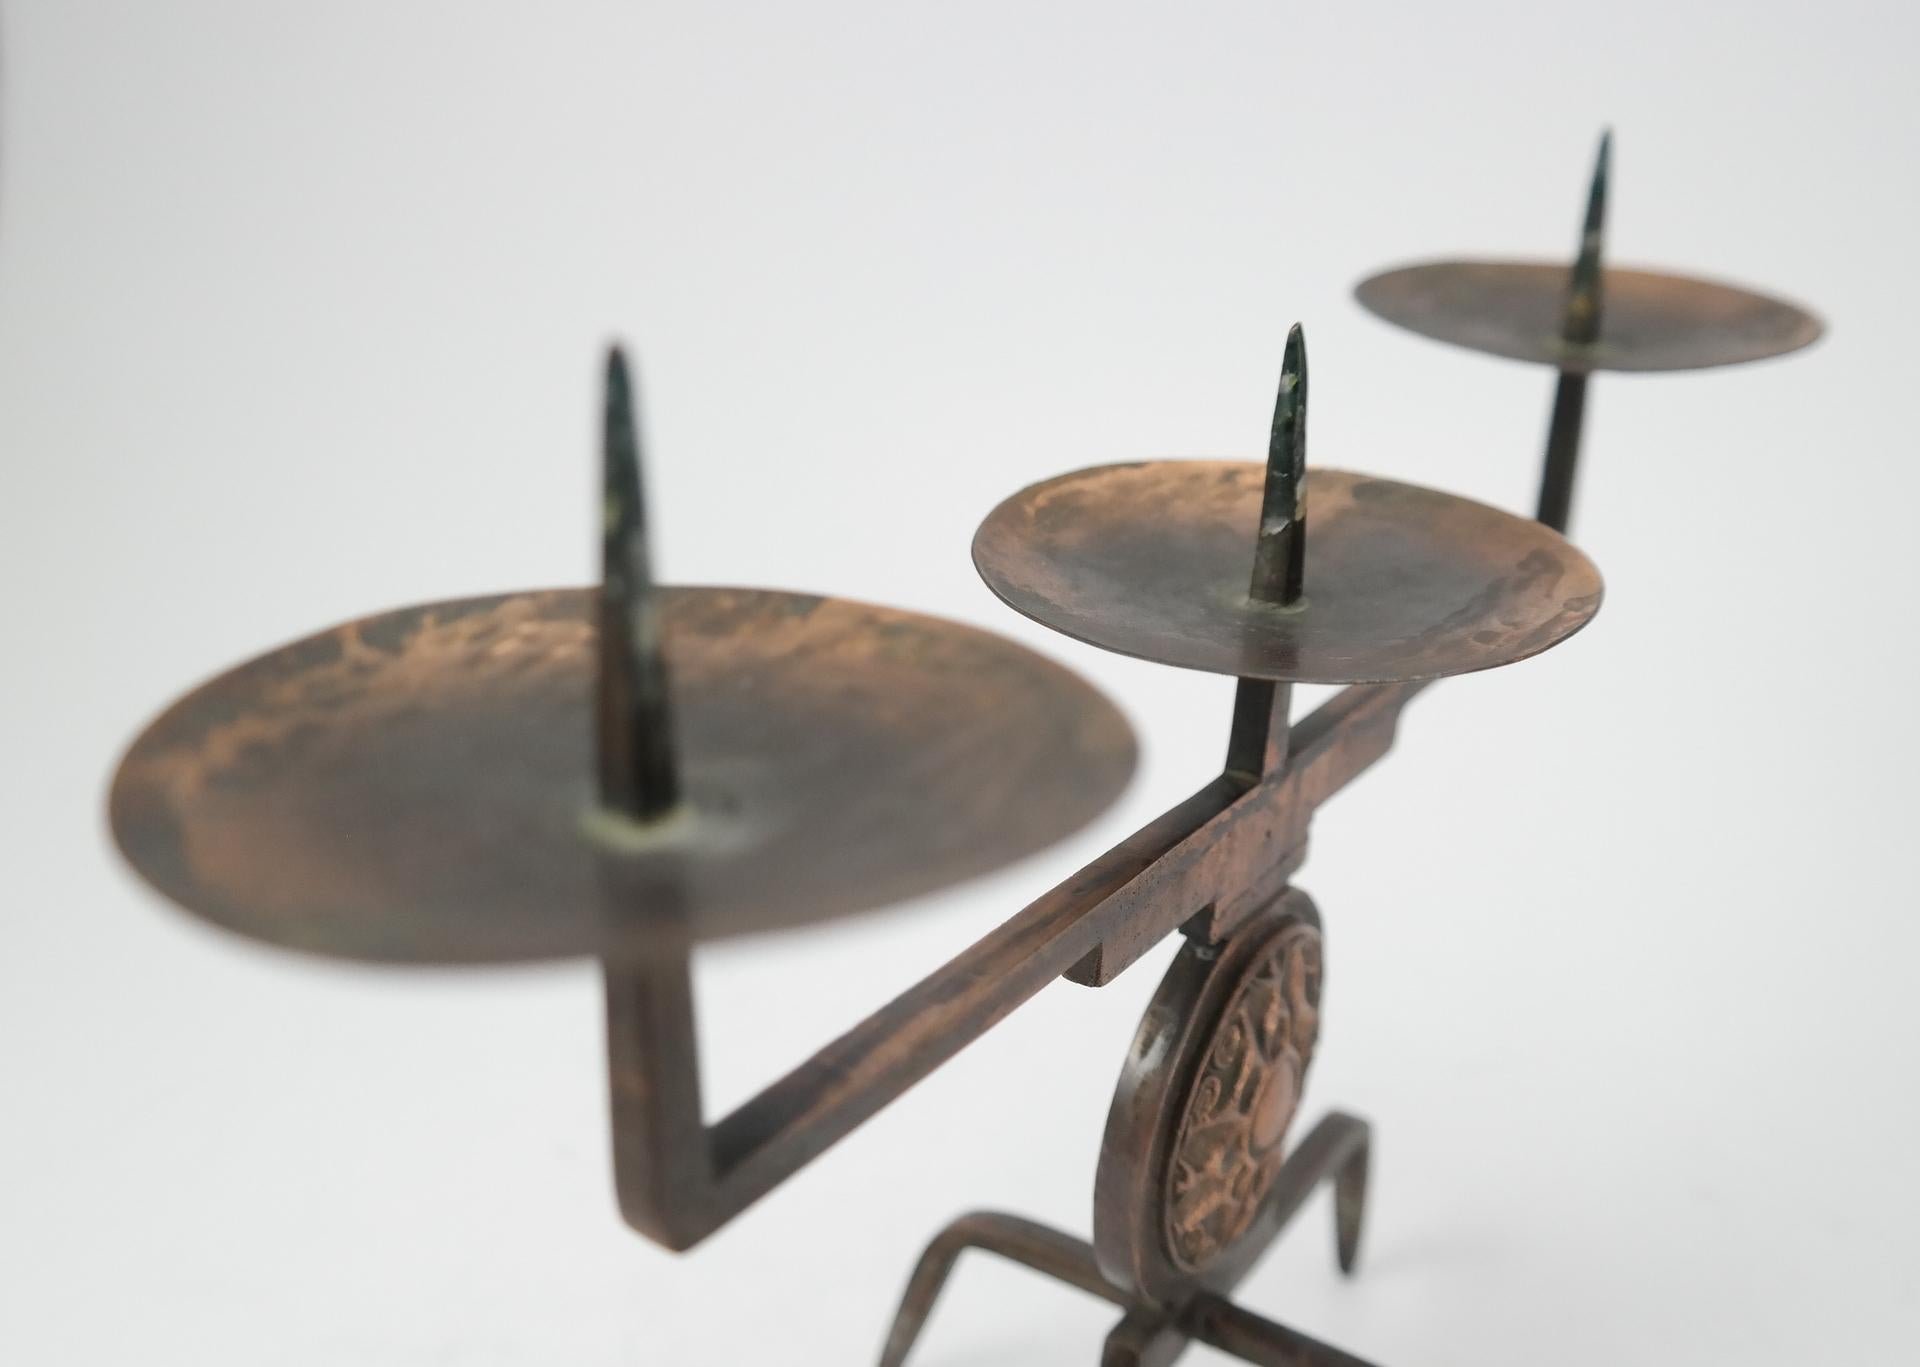 Midcentury Copper Candleholder by Gyula Szabo, 1970s For Sale 1